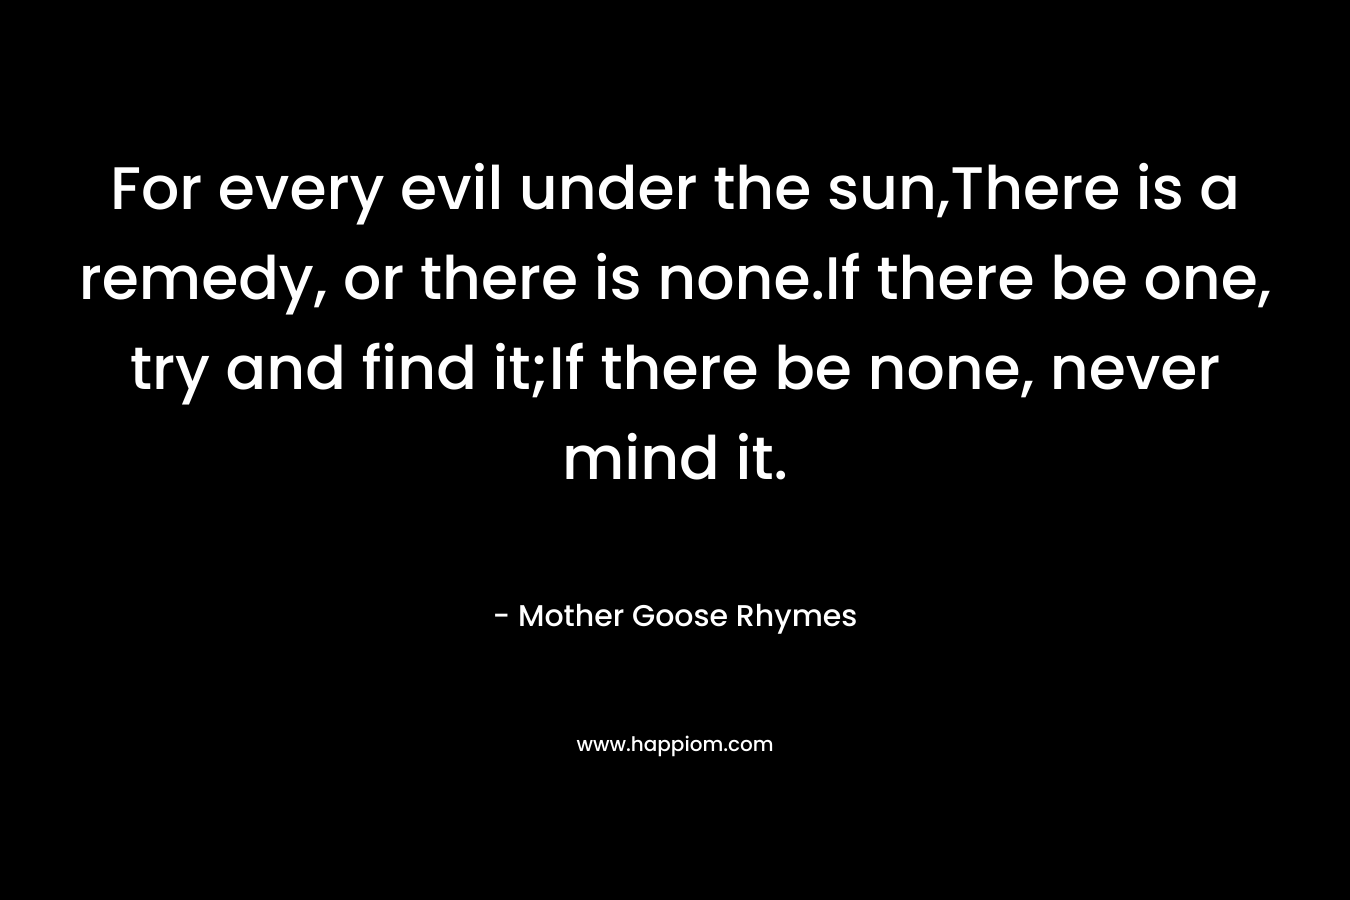 For every evil under the sun,There is a remedy, or there is none.If there be one, try and find it;If there be none, never mind it.